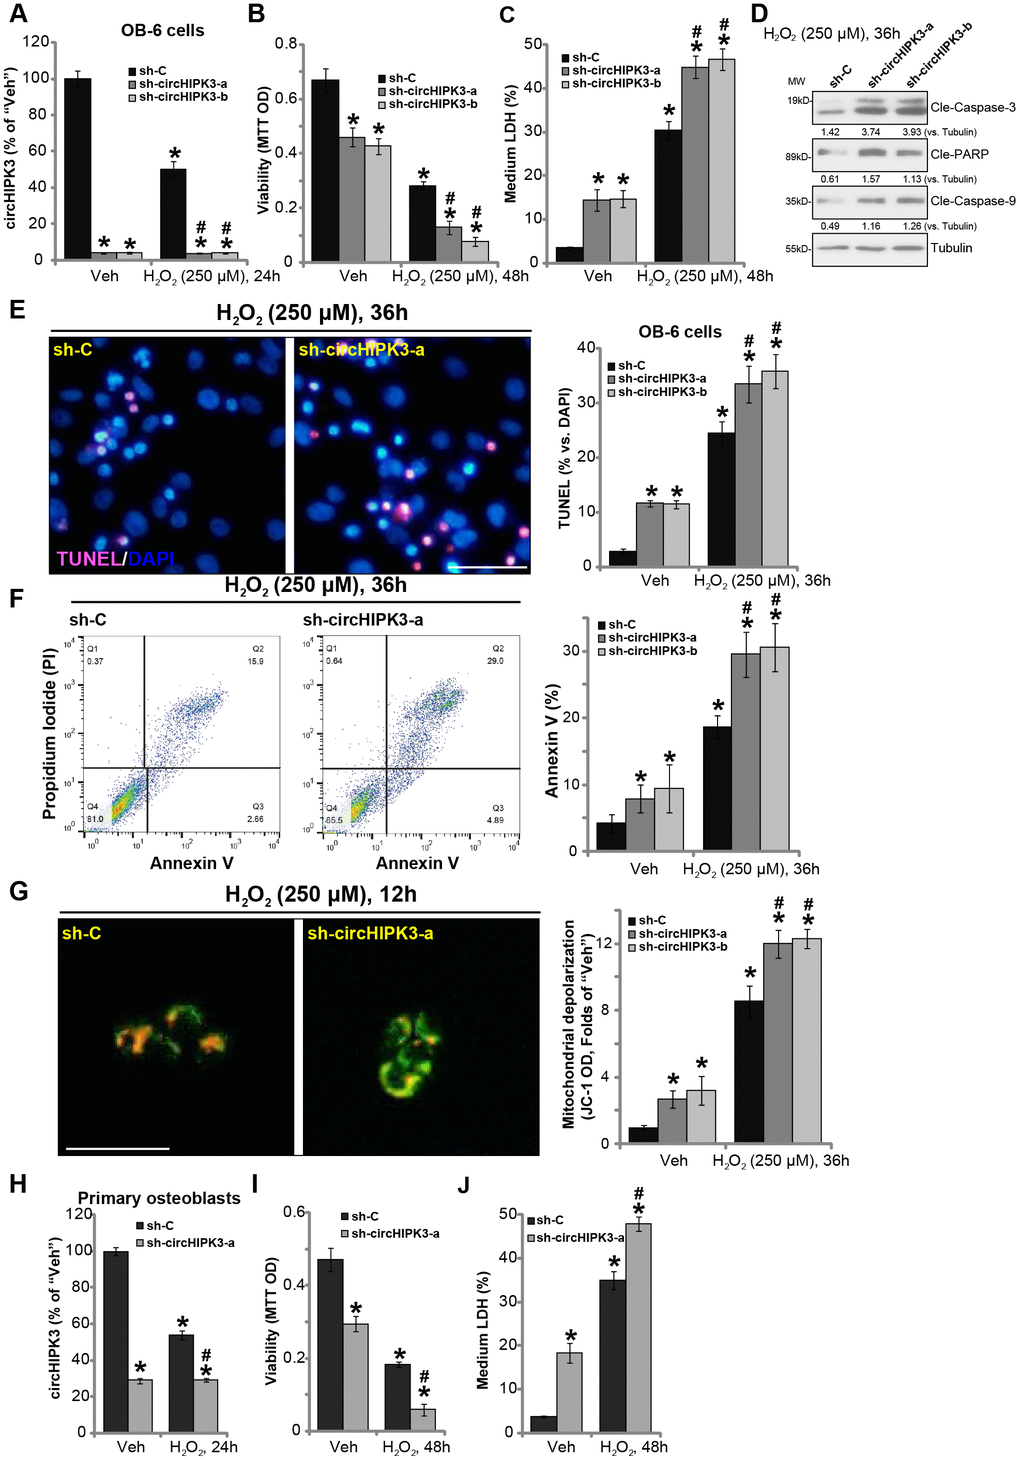 circHIPK3 silencing potentiates H2O2-induced death and apoptosis in human osteoblasts. OB-6 human osteoblastic cells were transfected with the lentiviral circHIPK3 shRNA (“sh-circHIPK3-a/b”, with non-overlapping sequences) or control shRNA lentivirus (“sh-C”), following puromycin selection the stable cells were established. Cells were treated with hydrogen peroxide (H2O2, 250 μM) and cultured for the applied time periods, relative circHIPK3 expression was tested by qPCR assay (A); Cell viability (B), cell death (C), cell apoptosis (D–F) and mitochondrial depolarization (G) were tested by the assays mentioned in the text, and results were quantified. The primary human osteoblasts were infected with “sh-circHIPK3-a” lentivirus or “sh-C” lentivirus for 24h, and then treated with hydrogen peroxide (H2O2, 250 μM) and cultured for the applied time periods, relative circHIPK3 expression, cell viability and death were tested by qPCR (H), MTT (I), and LDH release assay (J), respectively. Expression of the listed proteins was quantified and normalized to the loading control protein (β-) Tubulin (D). Quantified values were mean ± standard deviation (SD, n=5). * P #P 2O2 treatment of “sh-C” cells. Experiments were repeated five times, with similar results obtained. Bar=100 μm (E and G).